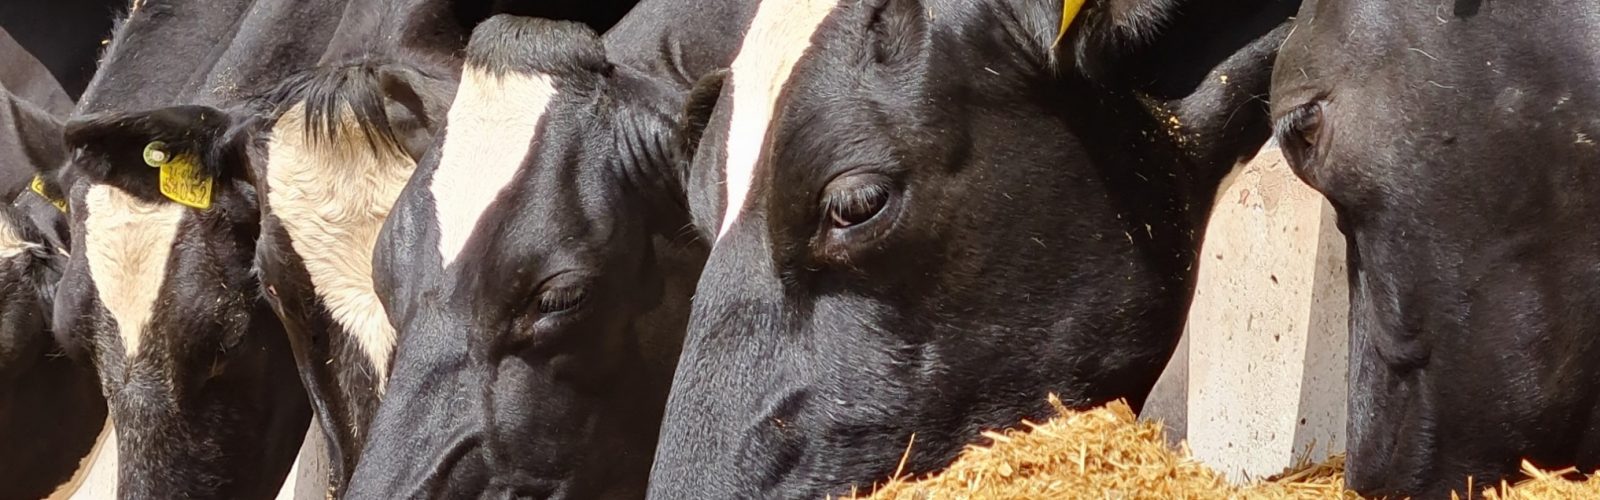 Managing nutrition at all stages of the lactation for maximum herd performance